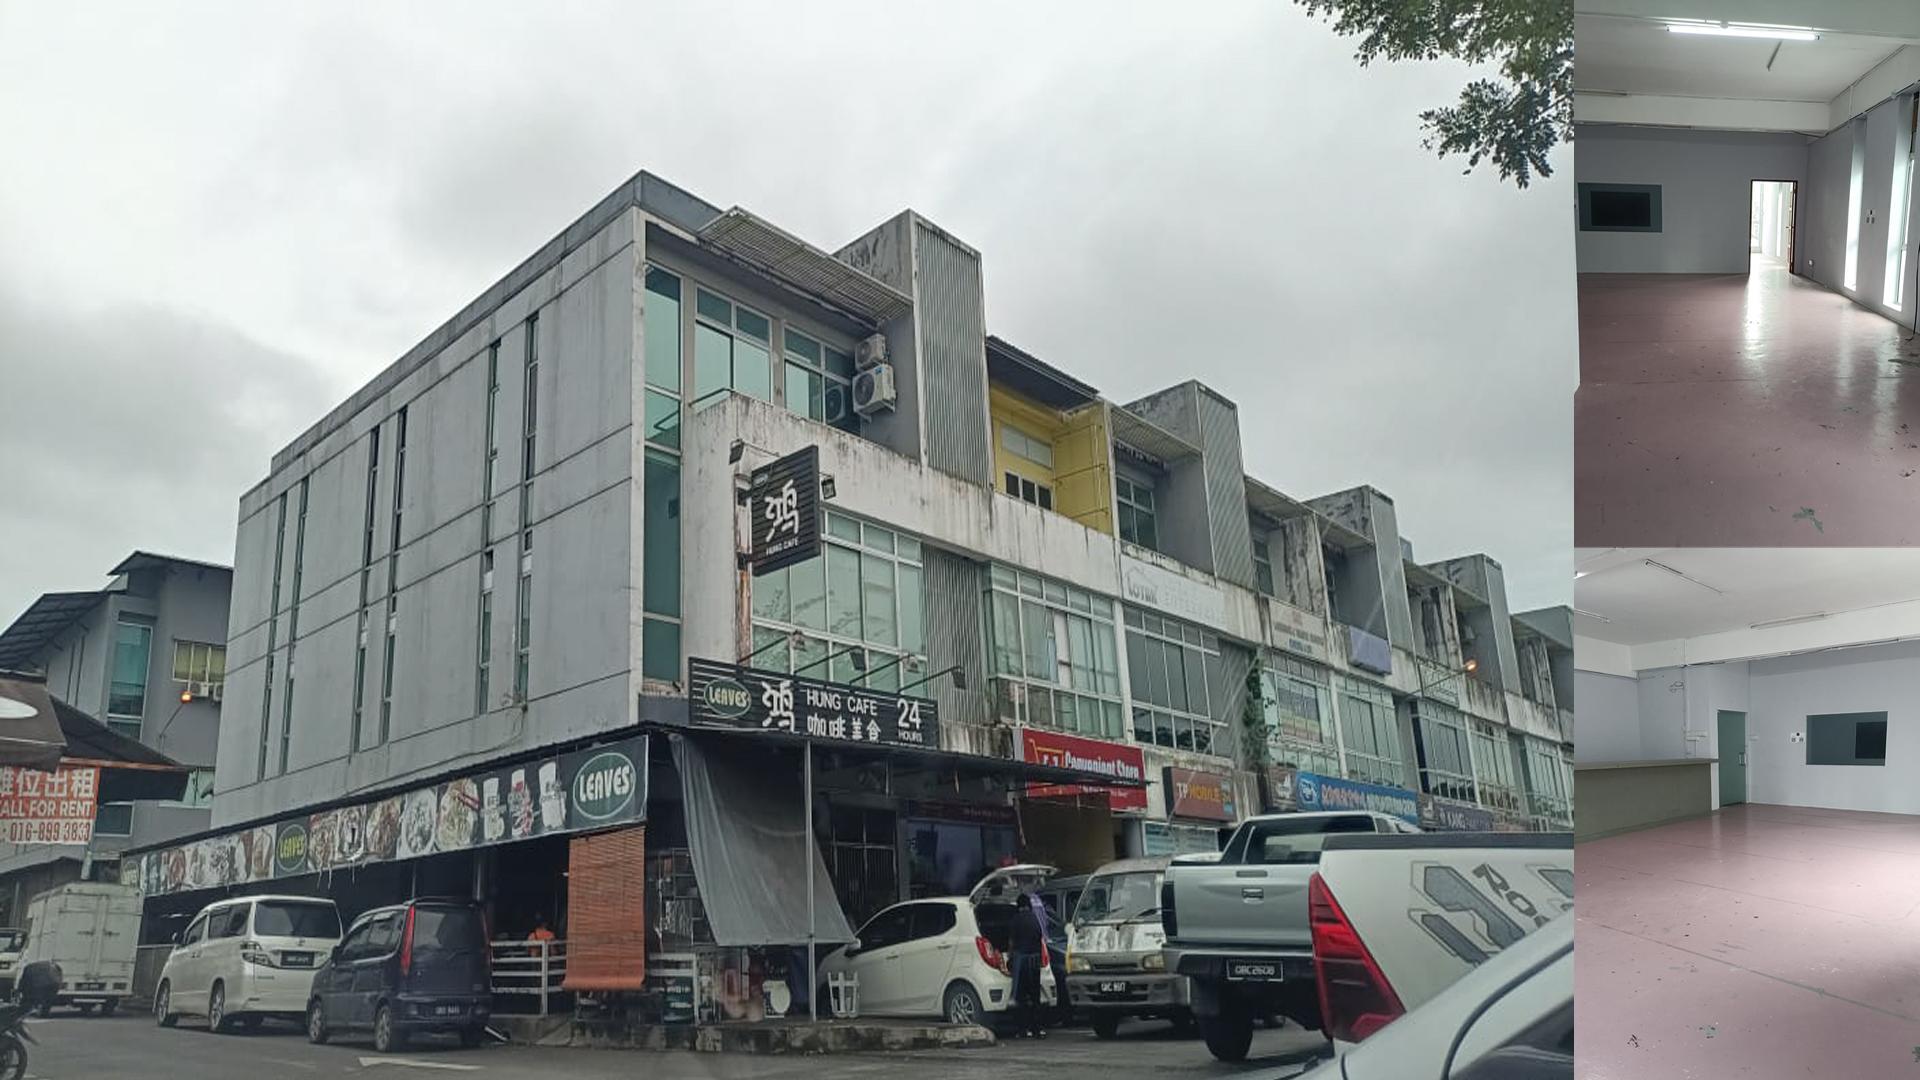 1st floor Shop Lot For Rent Located at Kuching City Mall, Jalan Stephen Yong